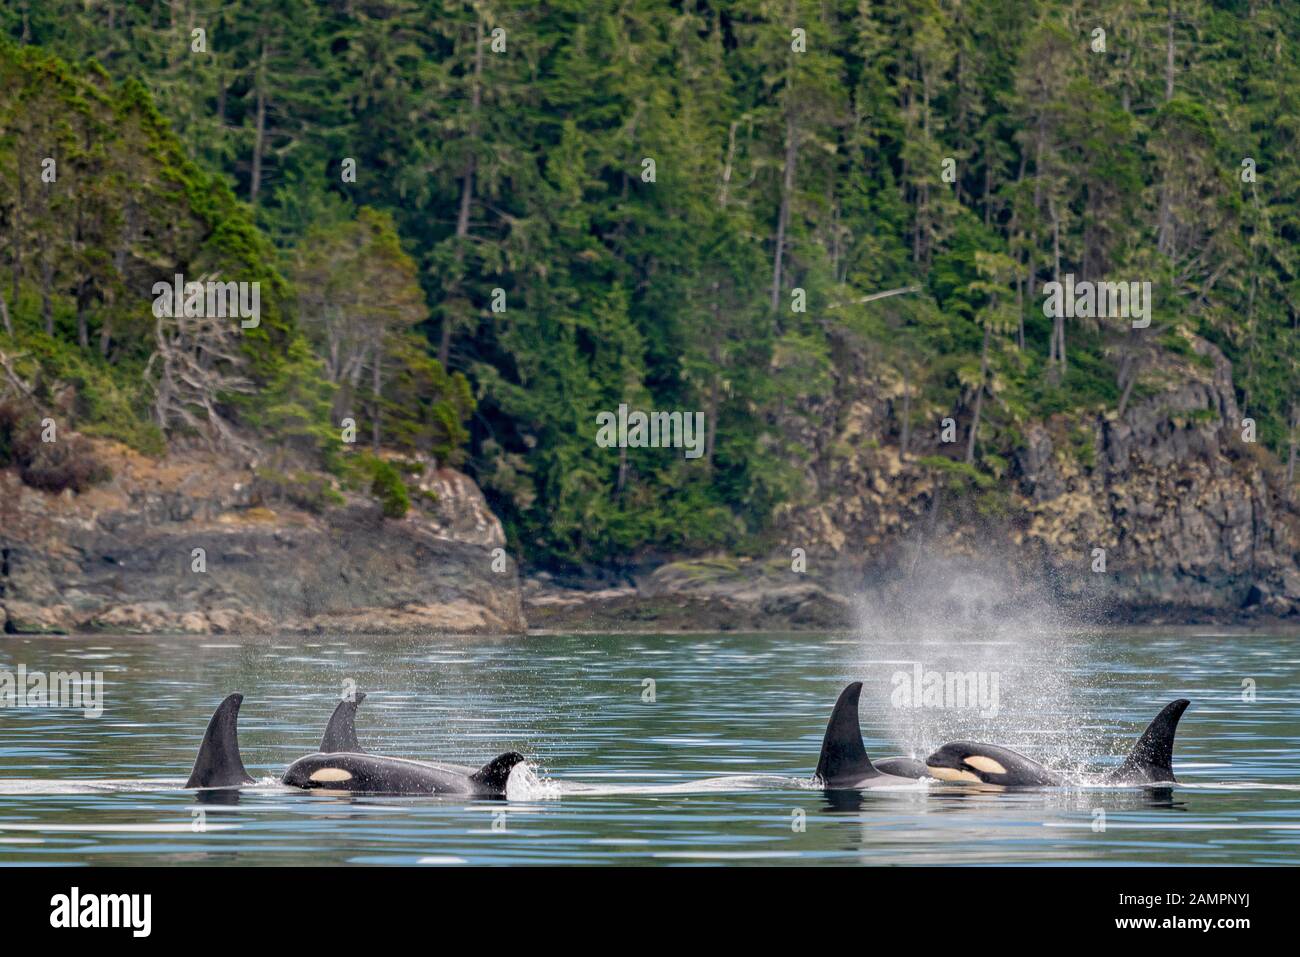 A54, A106, A118, A86,A75, northern resident killer whales, Orcinus orca, Johnstone Strait, First Nations Territory, British Columbia, Canada. Stock Photo